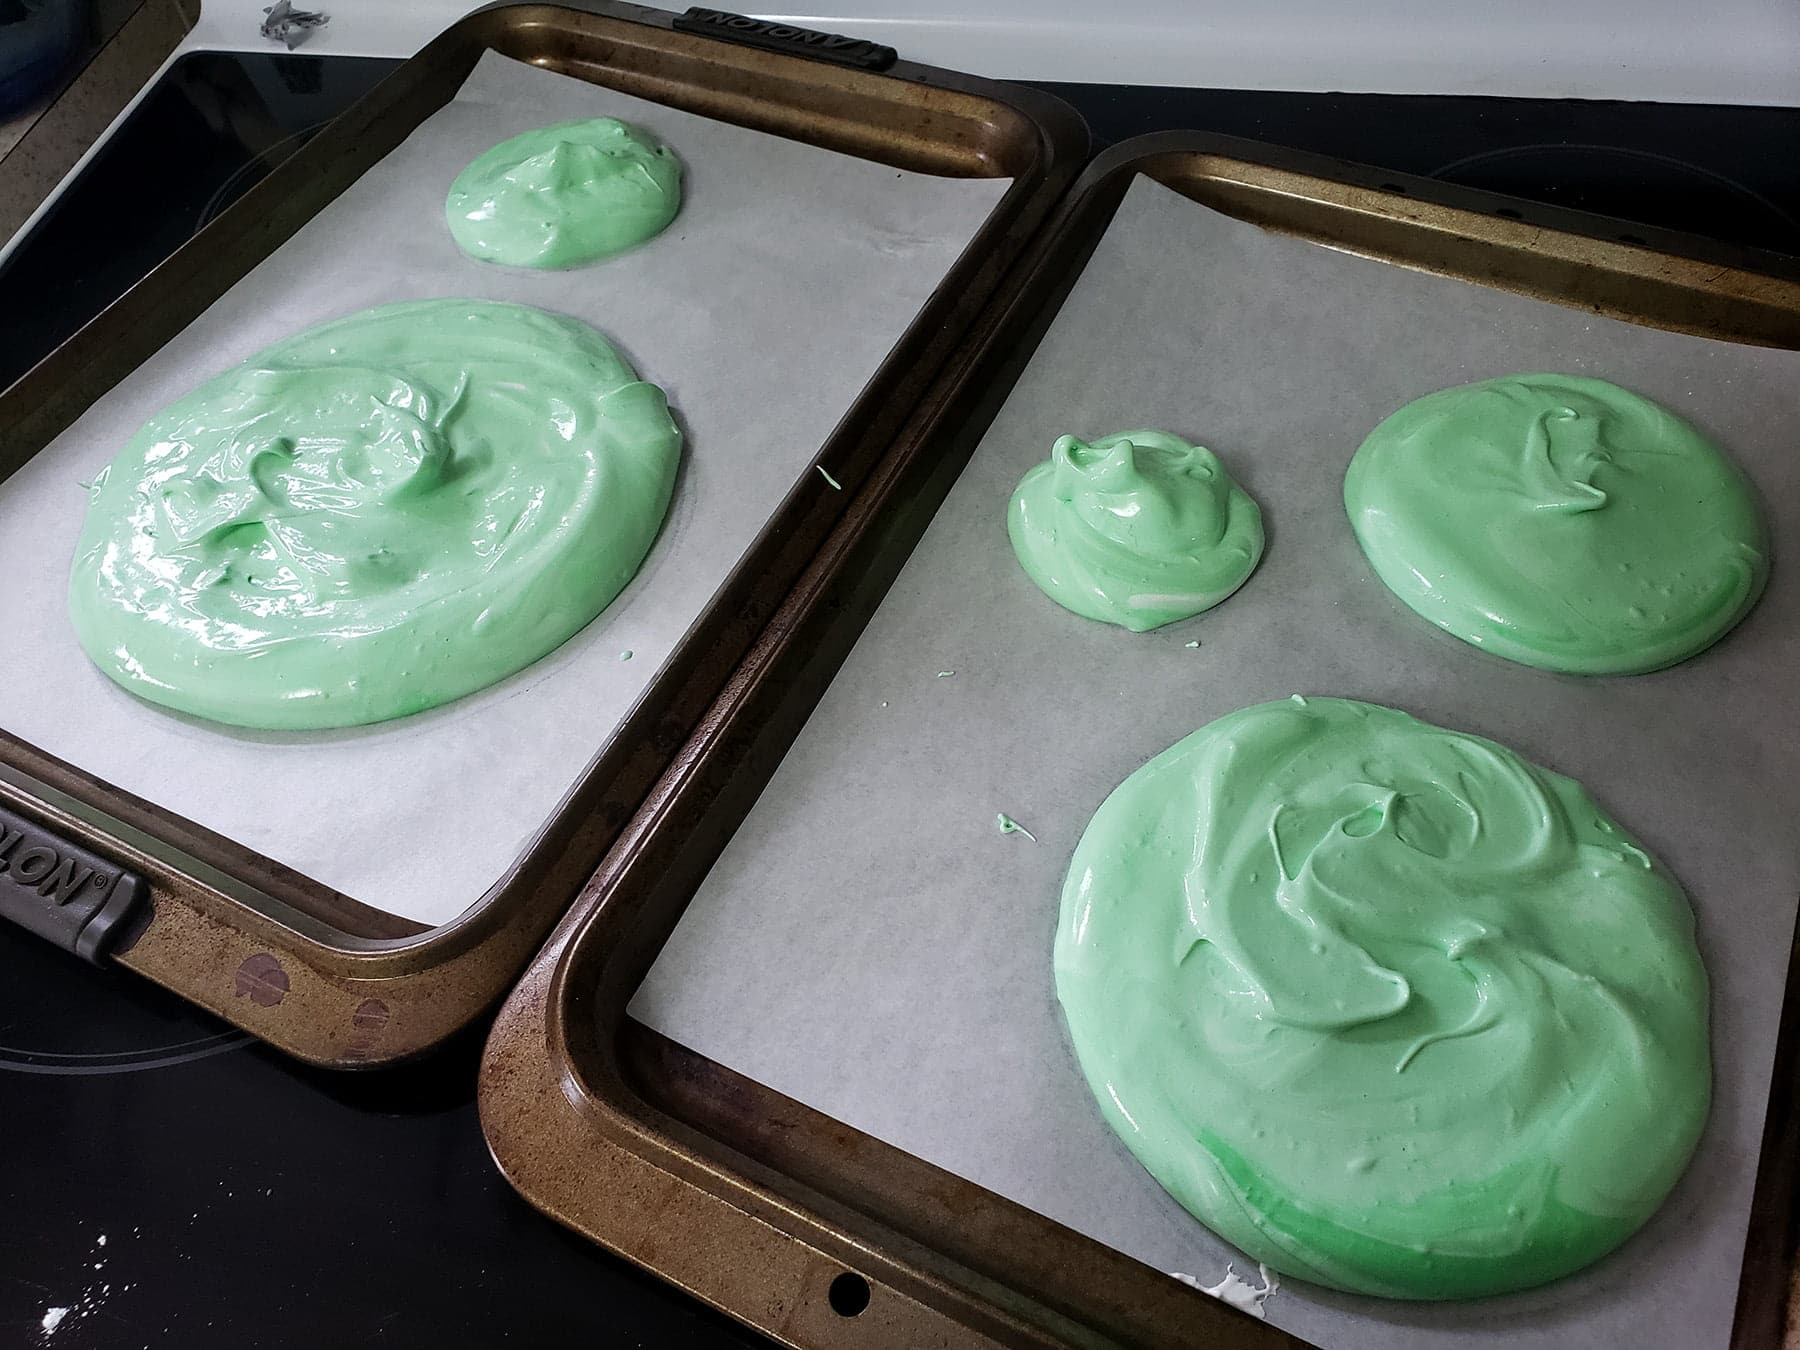 Two cookie sheets are lined with parchment paper, and have 5 rounds of green meringue - in various sizes - divided out between them.